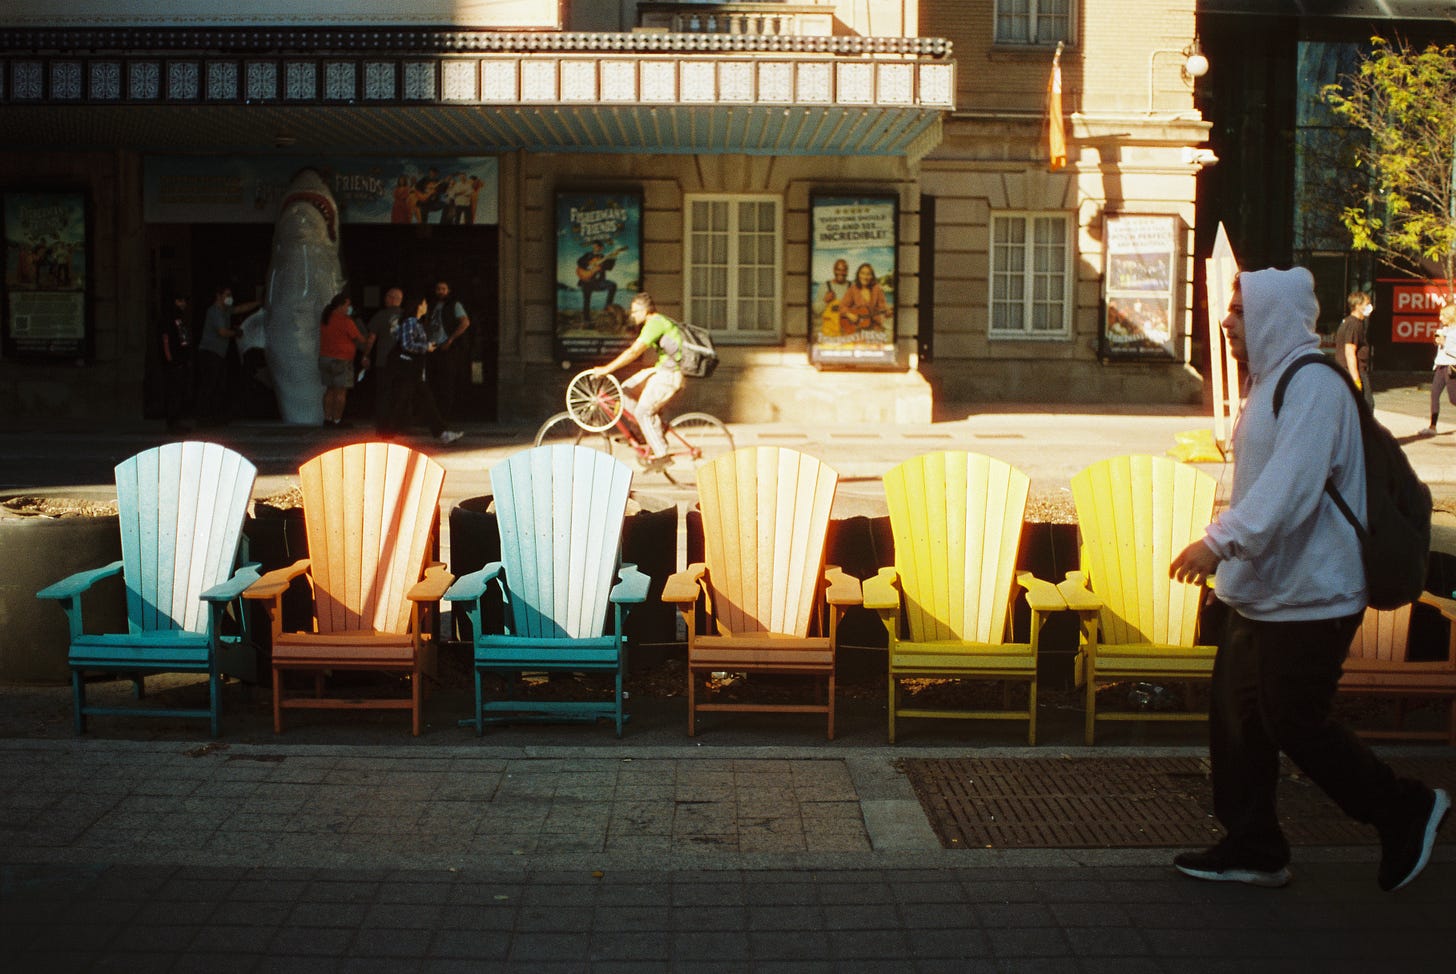 On a sidewalk, a row of multi-color Muskoka chairs, with a man in a grey hoody in the foreground; in the background a man is riding a bike and holding a third wheel, and behind him a crew is moving a ceramic shark statue to the front of a theater promoting a musical about Jaws, the movie.